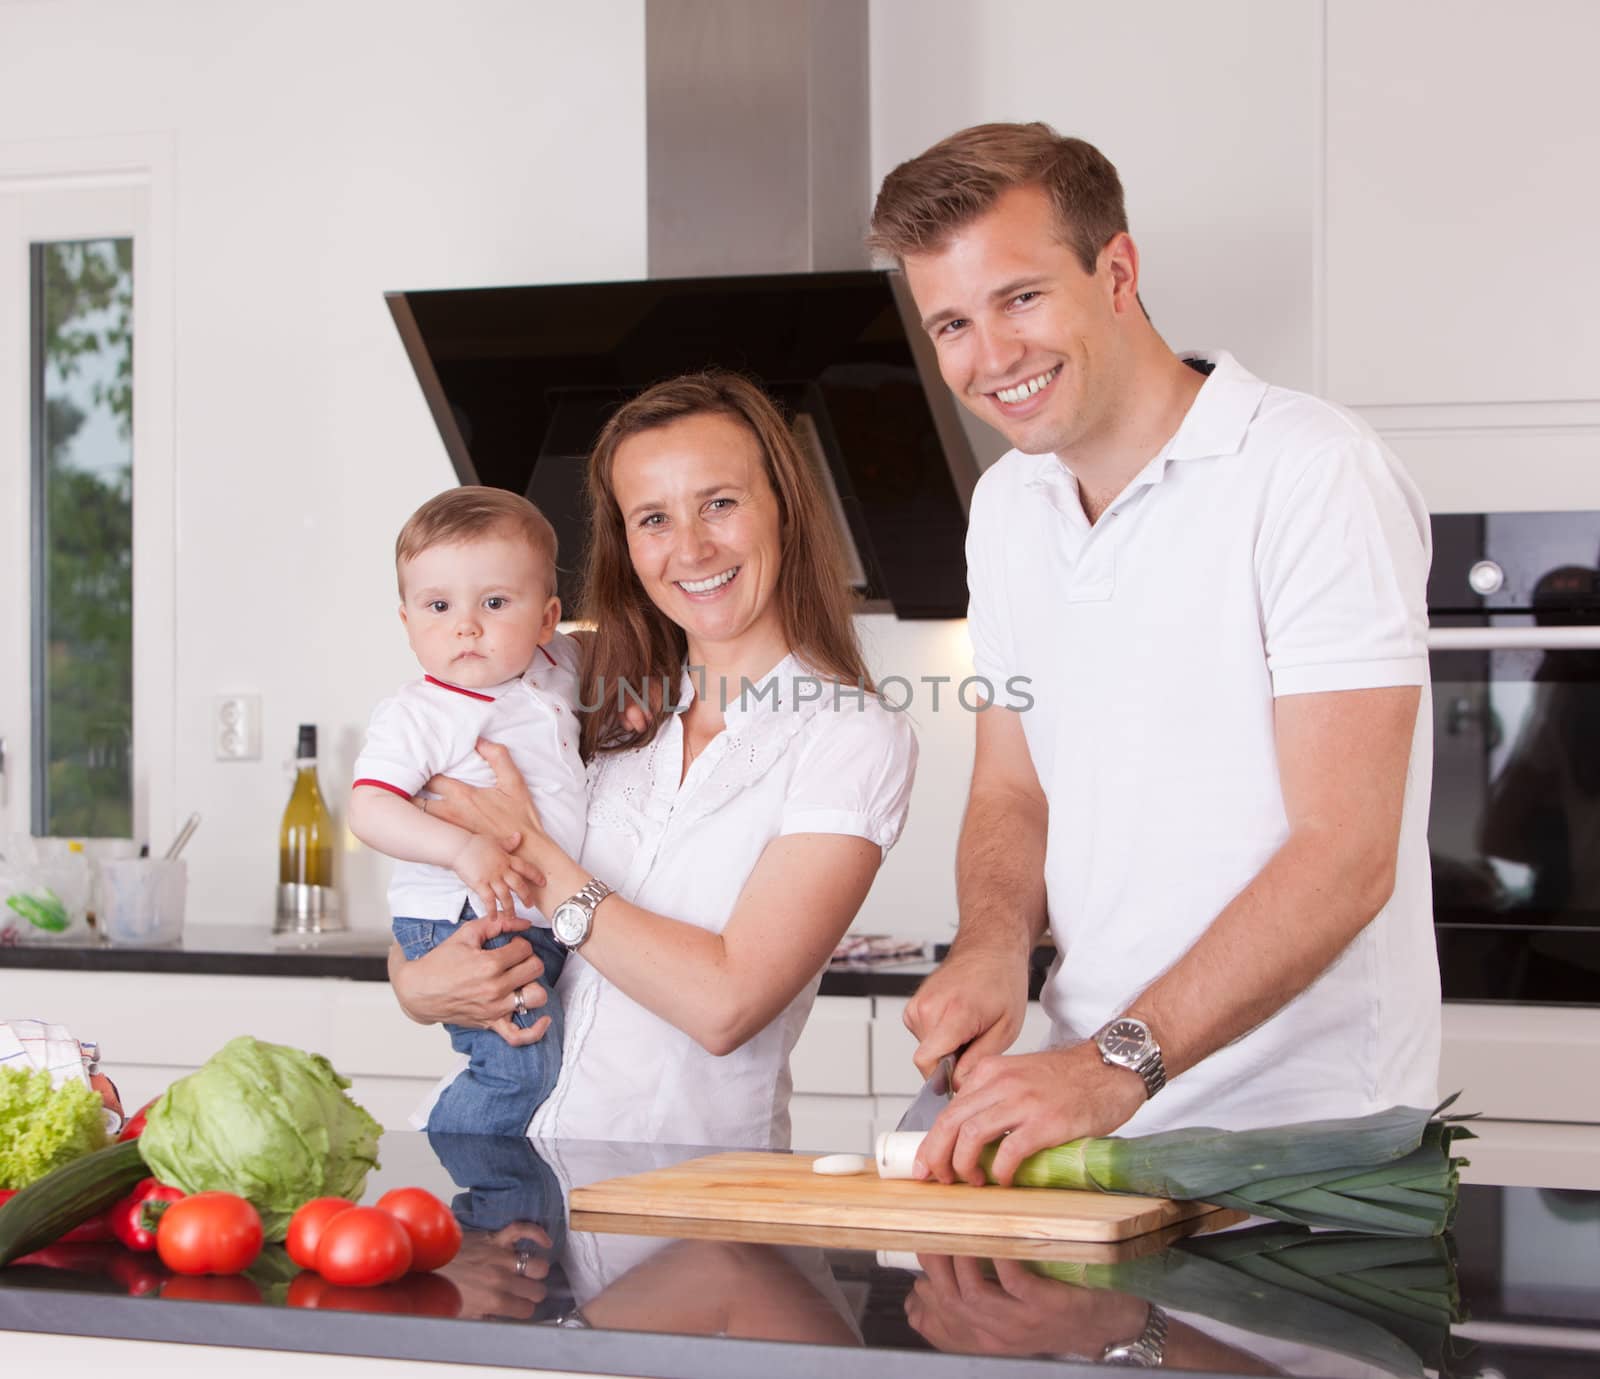 A happy family cutting vegetables in a kitchen, looking at the camera